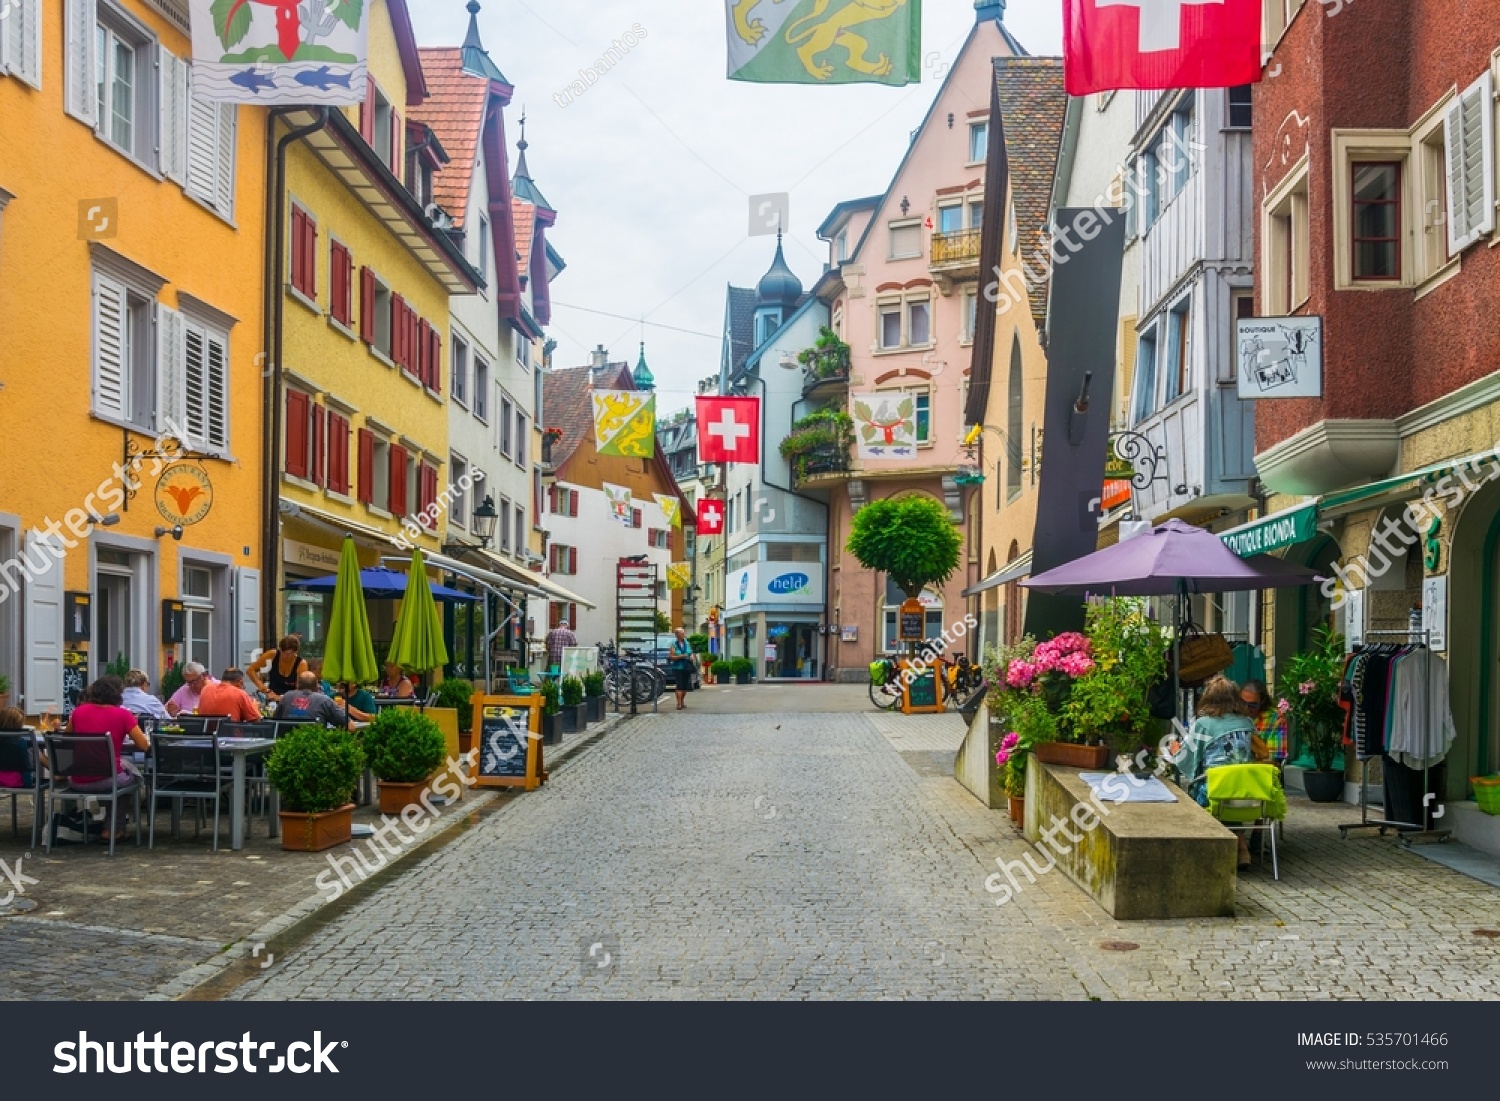 ARBON, SWITZERLAND, JULY 22, 2016: view of the main street of the swiss town Arbon famous for ist saint martin church and castle
 #535701466